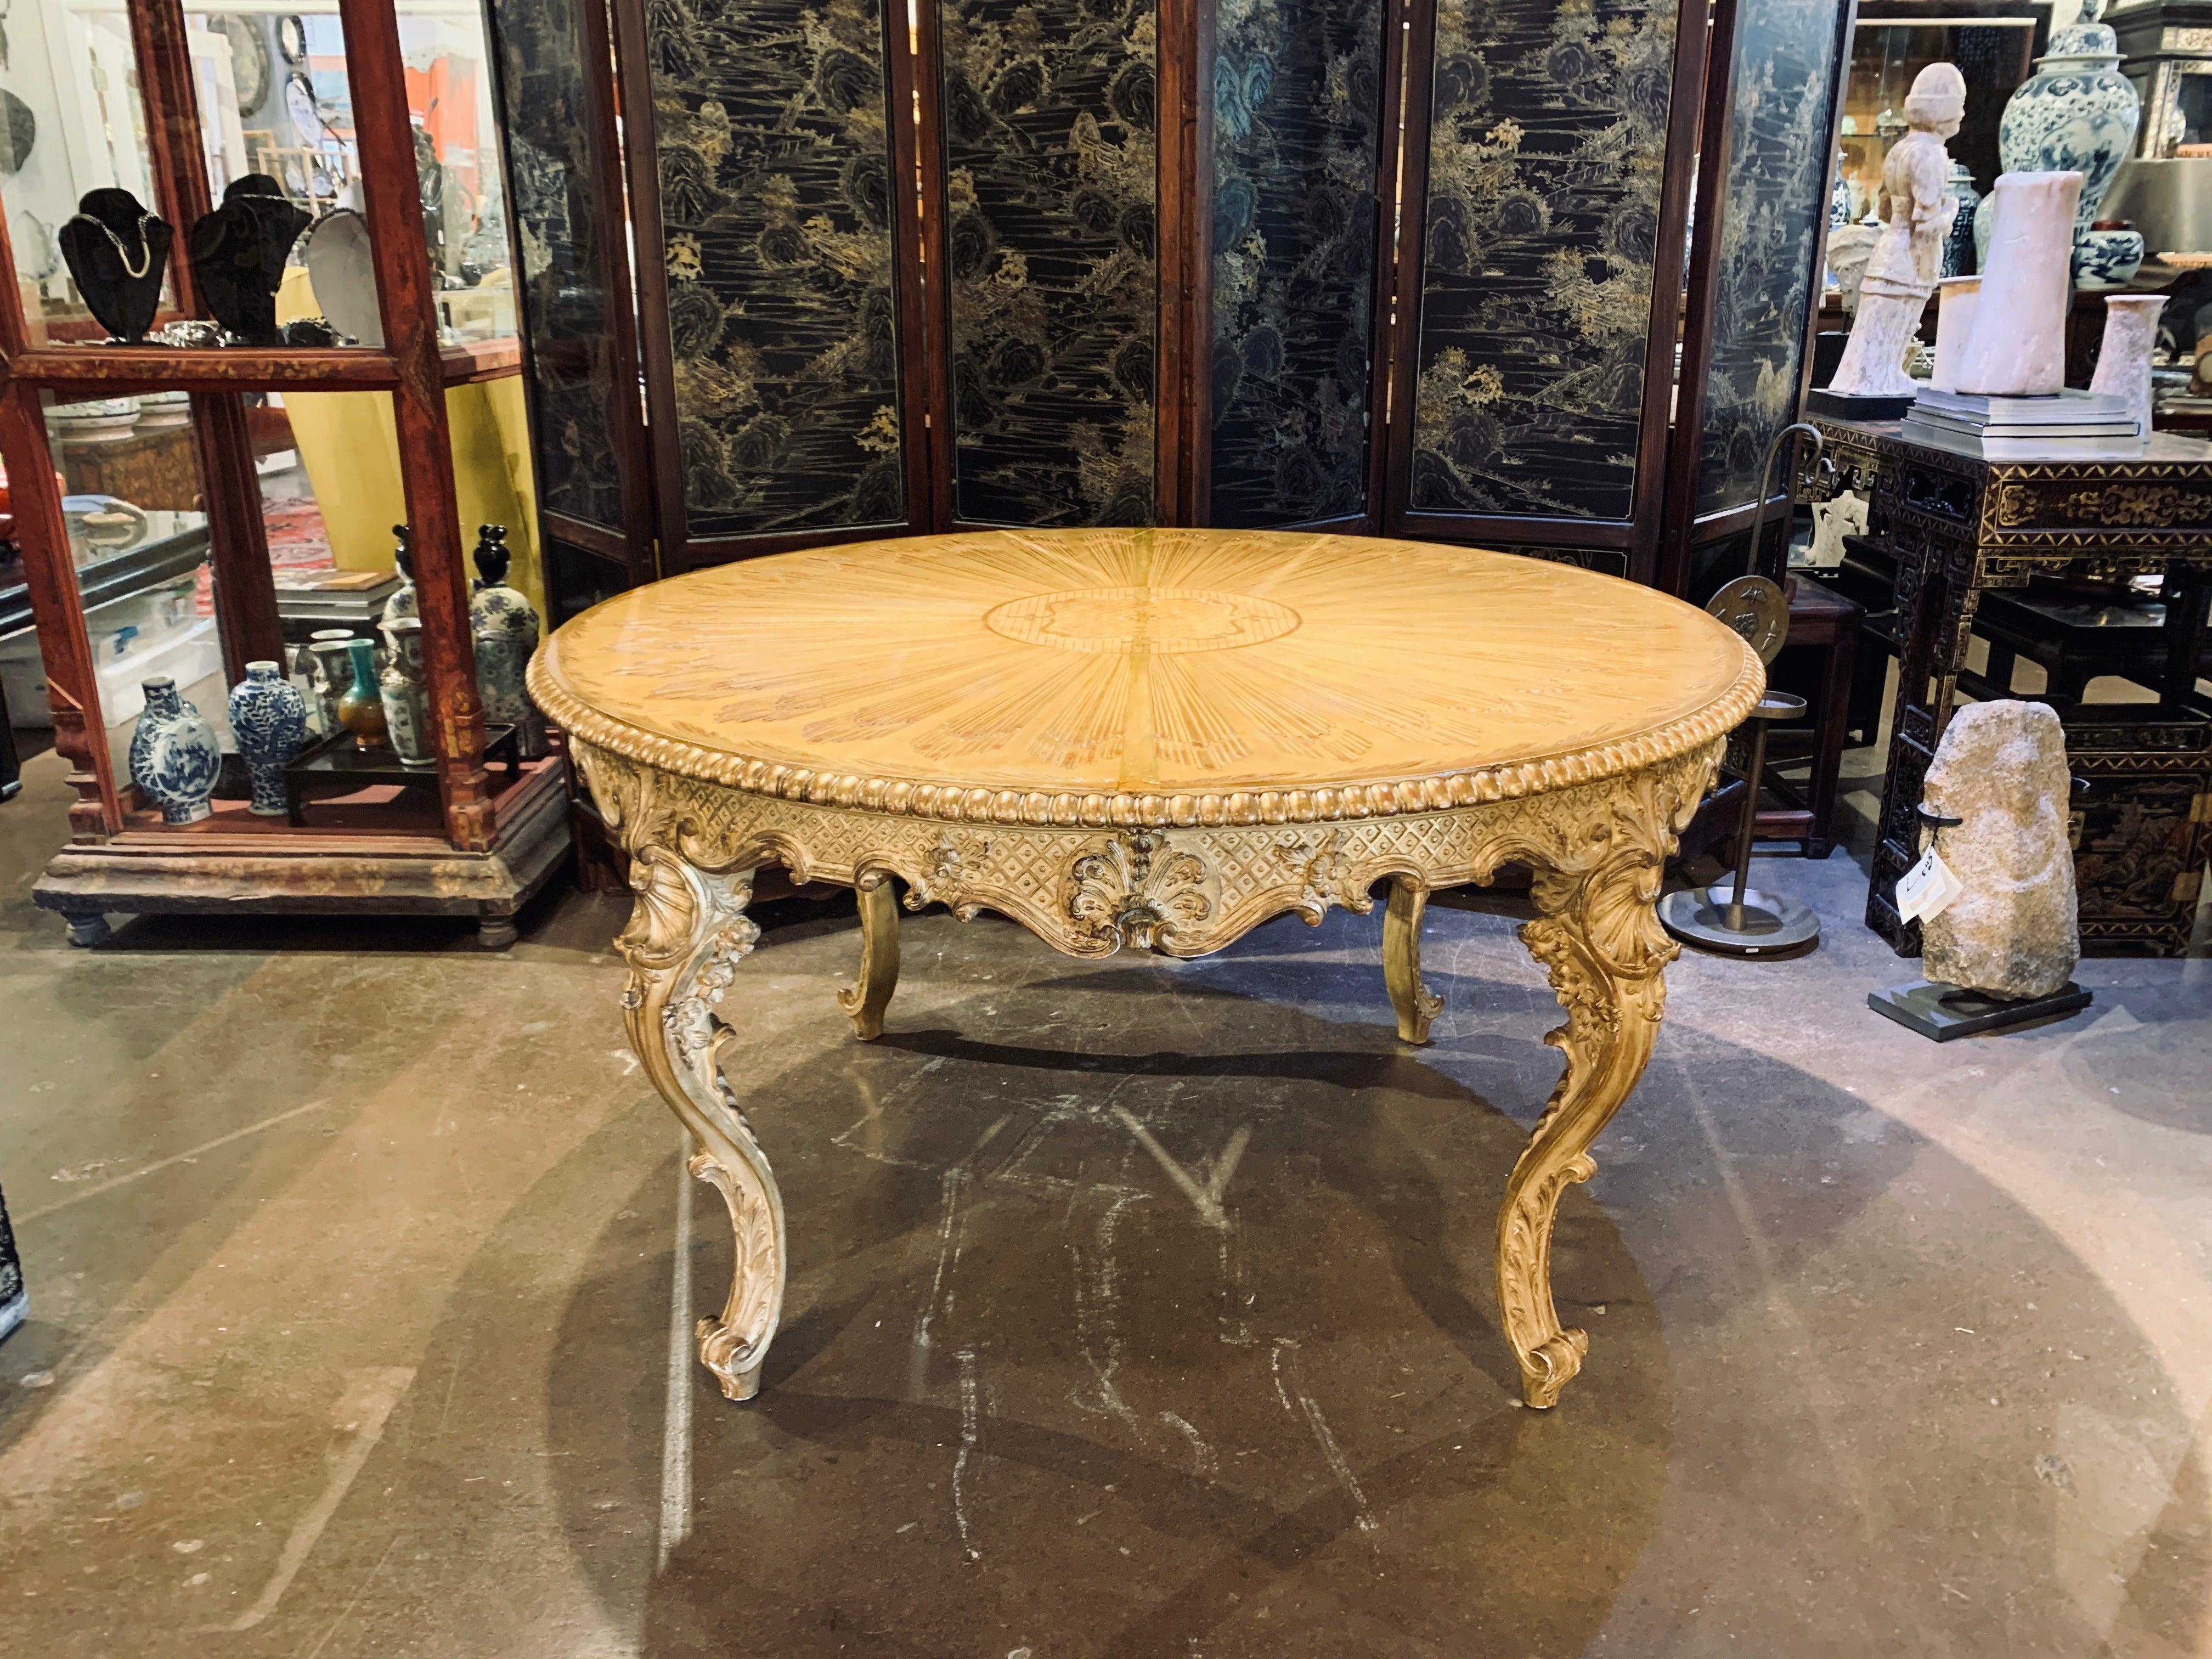 An exquisite, richly gilt Italian carved limewood round center table, late 18th century, probably Naples, Italy. 

The impressive round center table of a restrained carved Rococo design, with four cabriole legs, a shaped apron, and caved round